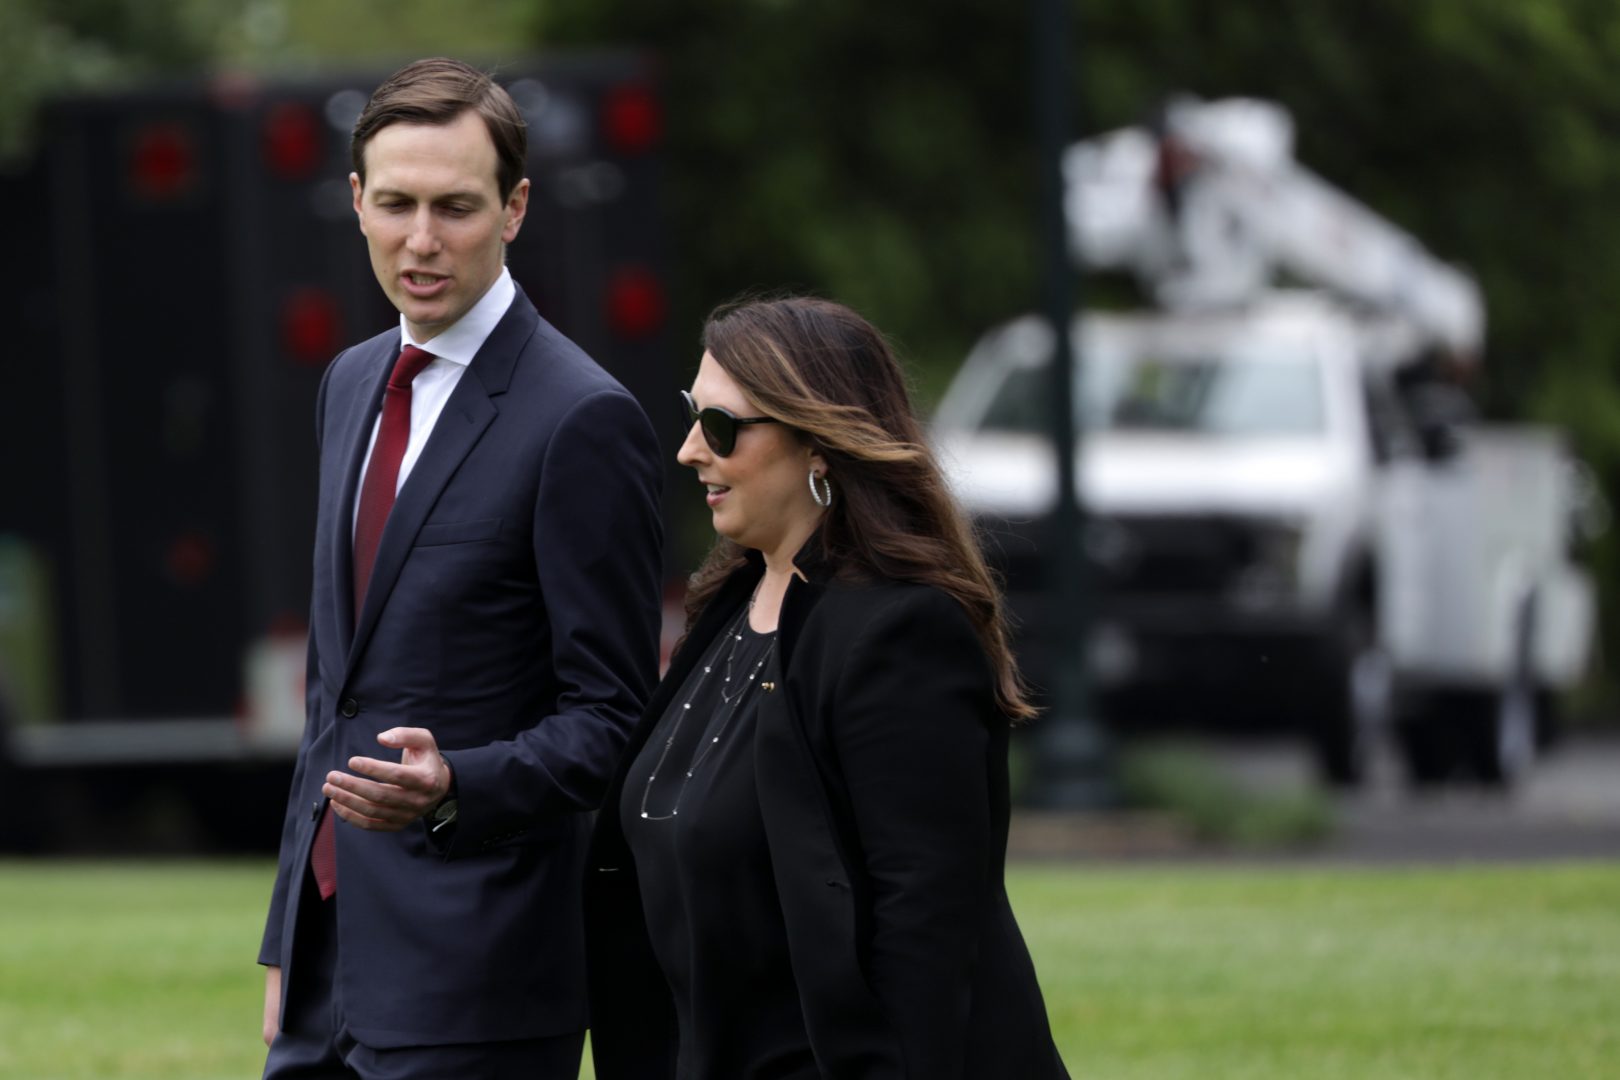 Republican National Committee Chair Ronna McDaniel walks with White House senior adviser Jared Kushner on the South Lawn of the White House in May. She is describing the August convention as a 